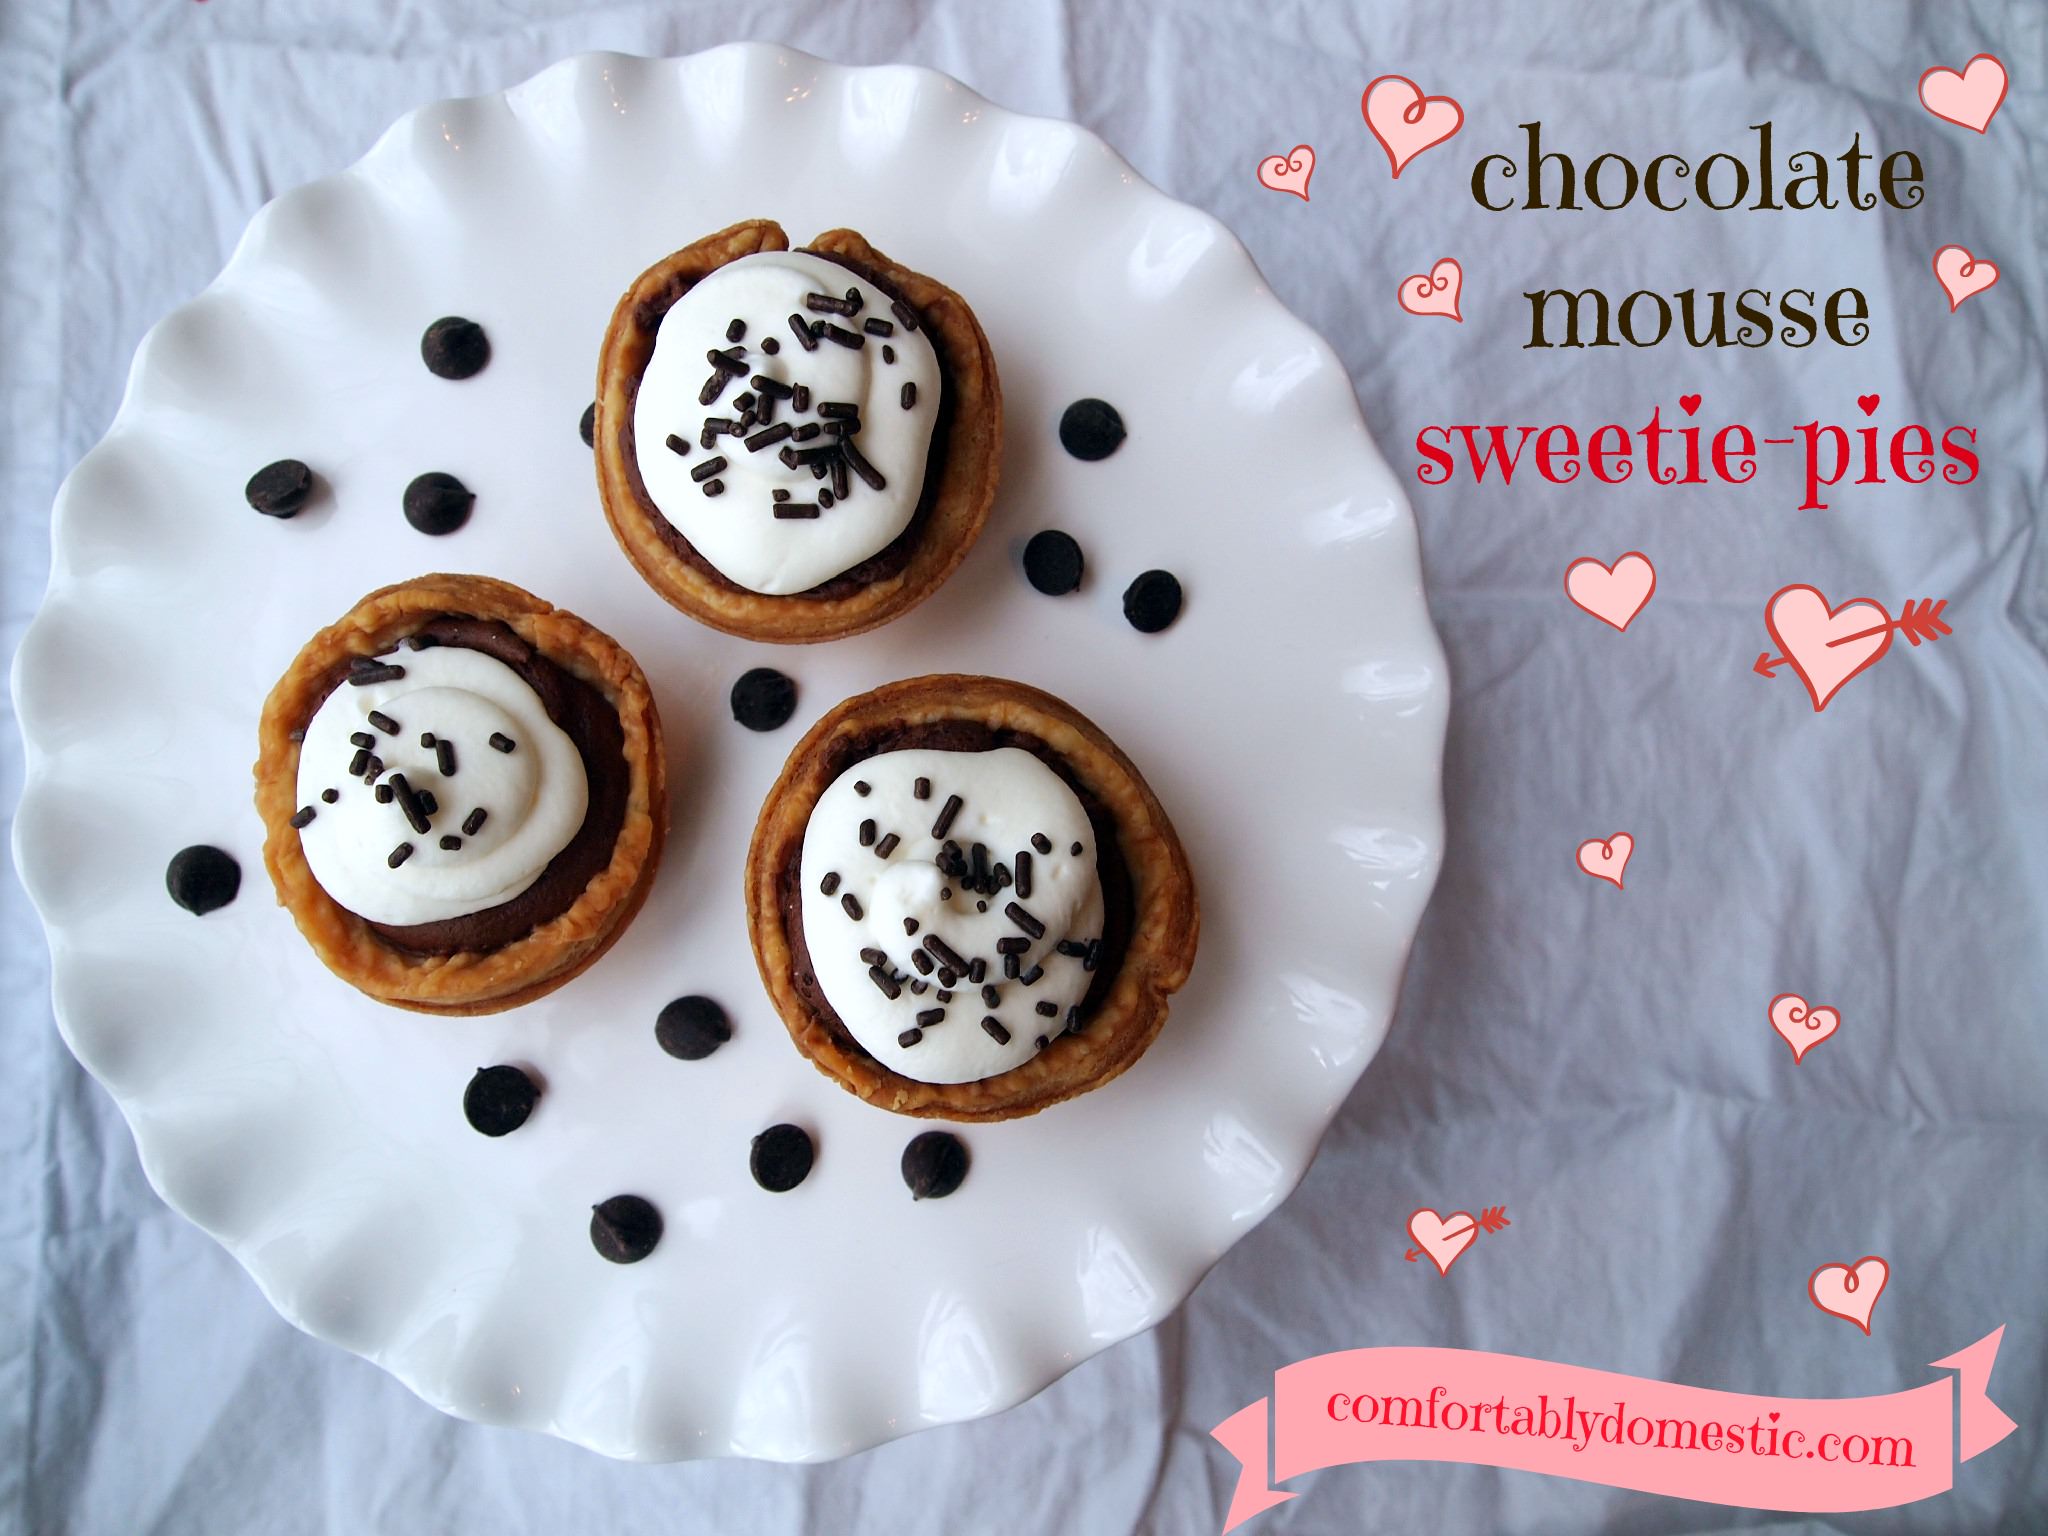 Chocolate Mousse Pie - Chocolate mousse is the star of the show in these adorable and delicious chocolate mousse sweetie pies. The perfect Valentine's Day dessert! | ComfortablyDomestic.com